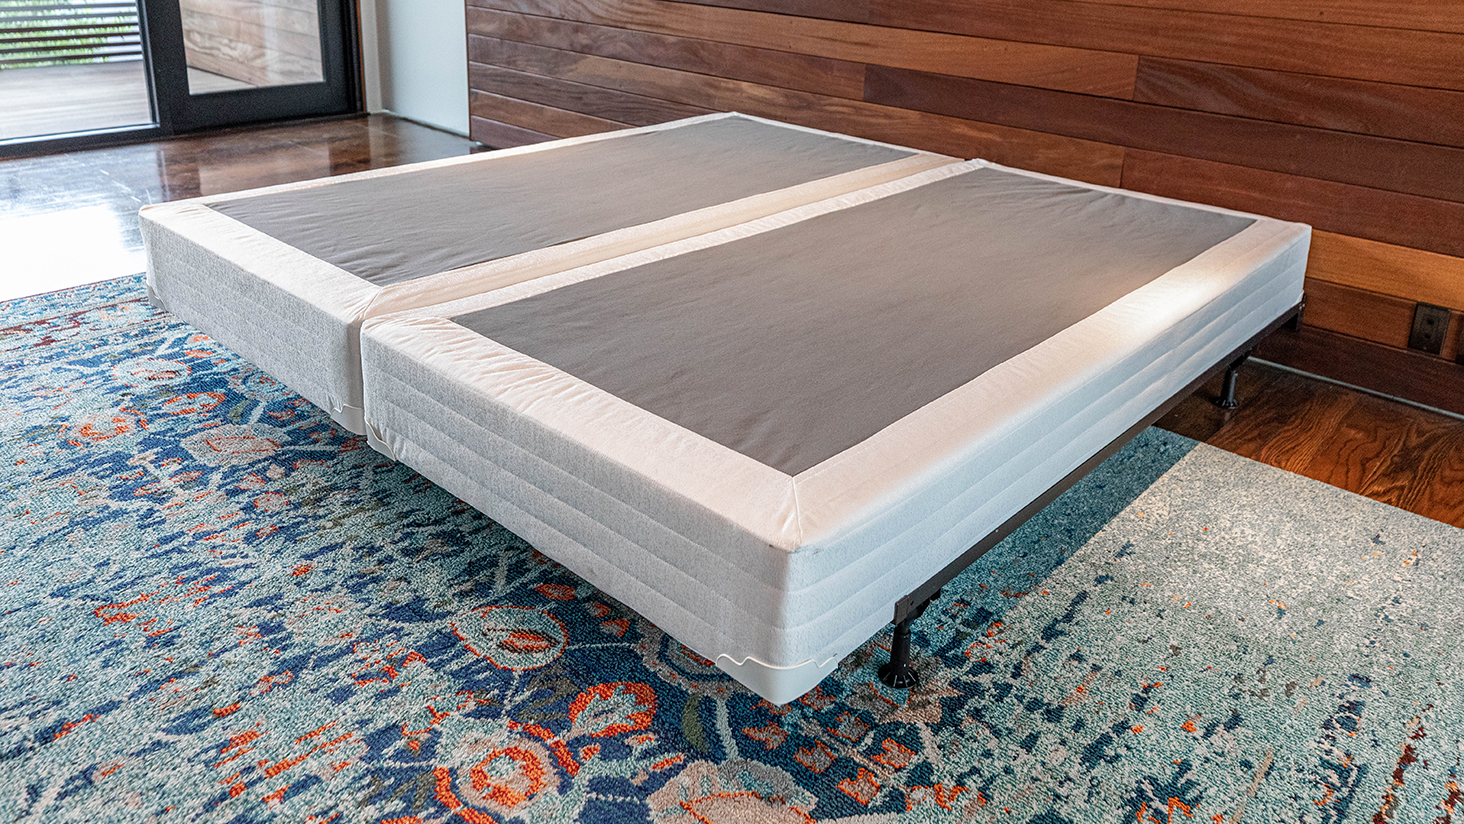 Can A Bad Box Spring Ruin Mattress, Bed Frame To Replace Box Spring